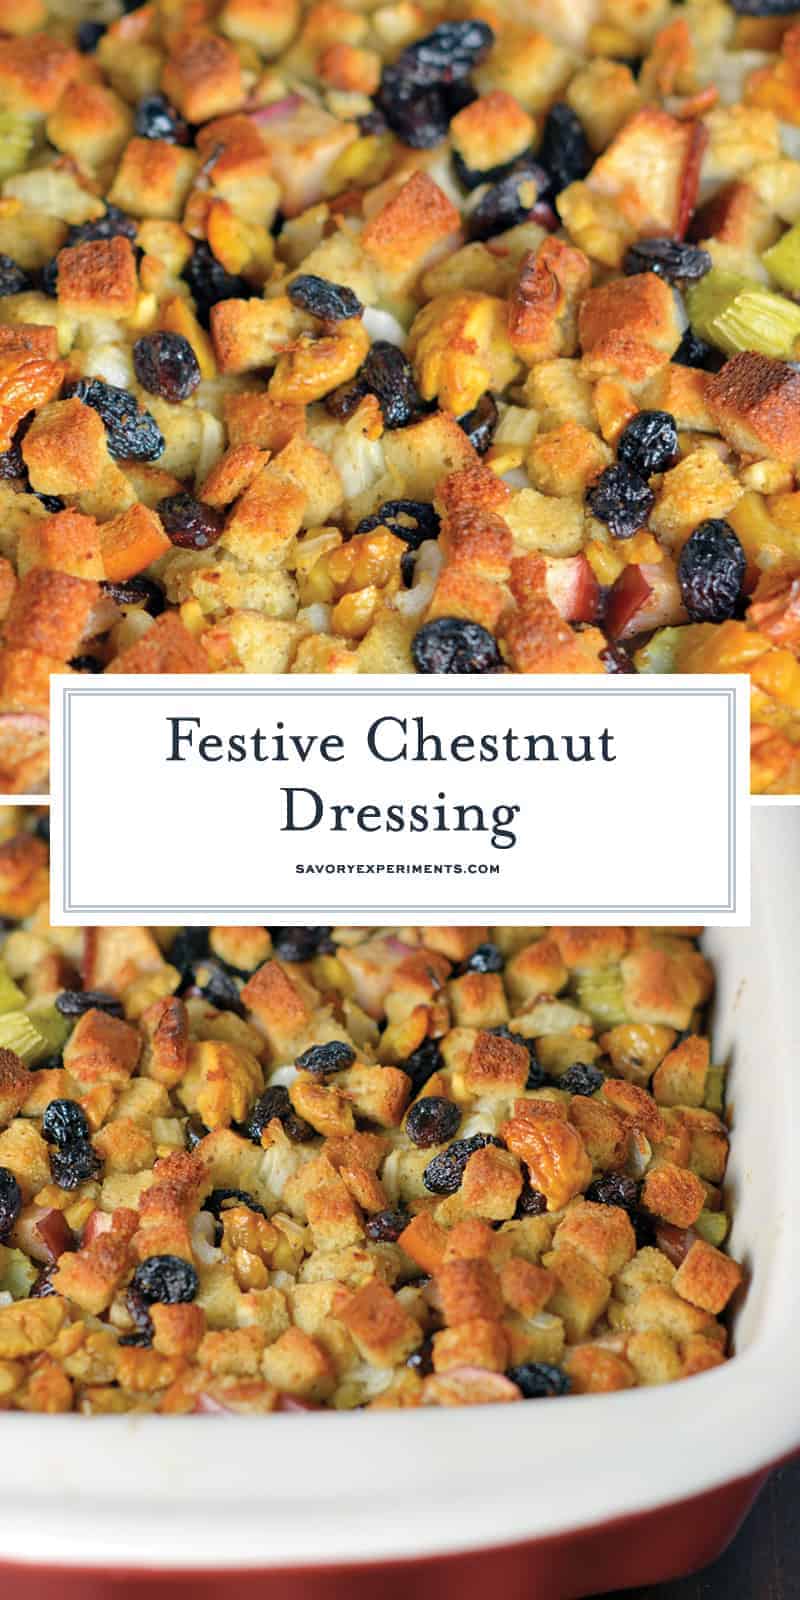 Roasted Chestnut Dressing is a rich and buttery stuffing recipe using roasted chestnuts, apples and raisins. The perfect holiday side dish! #chestnutrecipes #chestnutstuffing #chestnutdressing www.savoryexperiments.com 